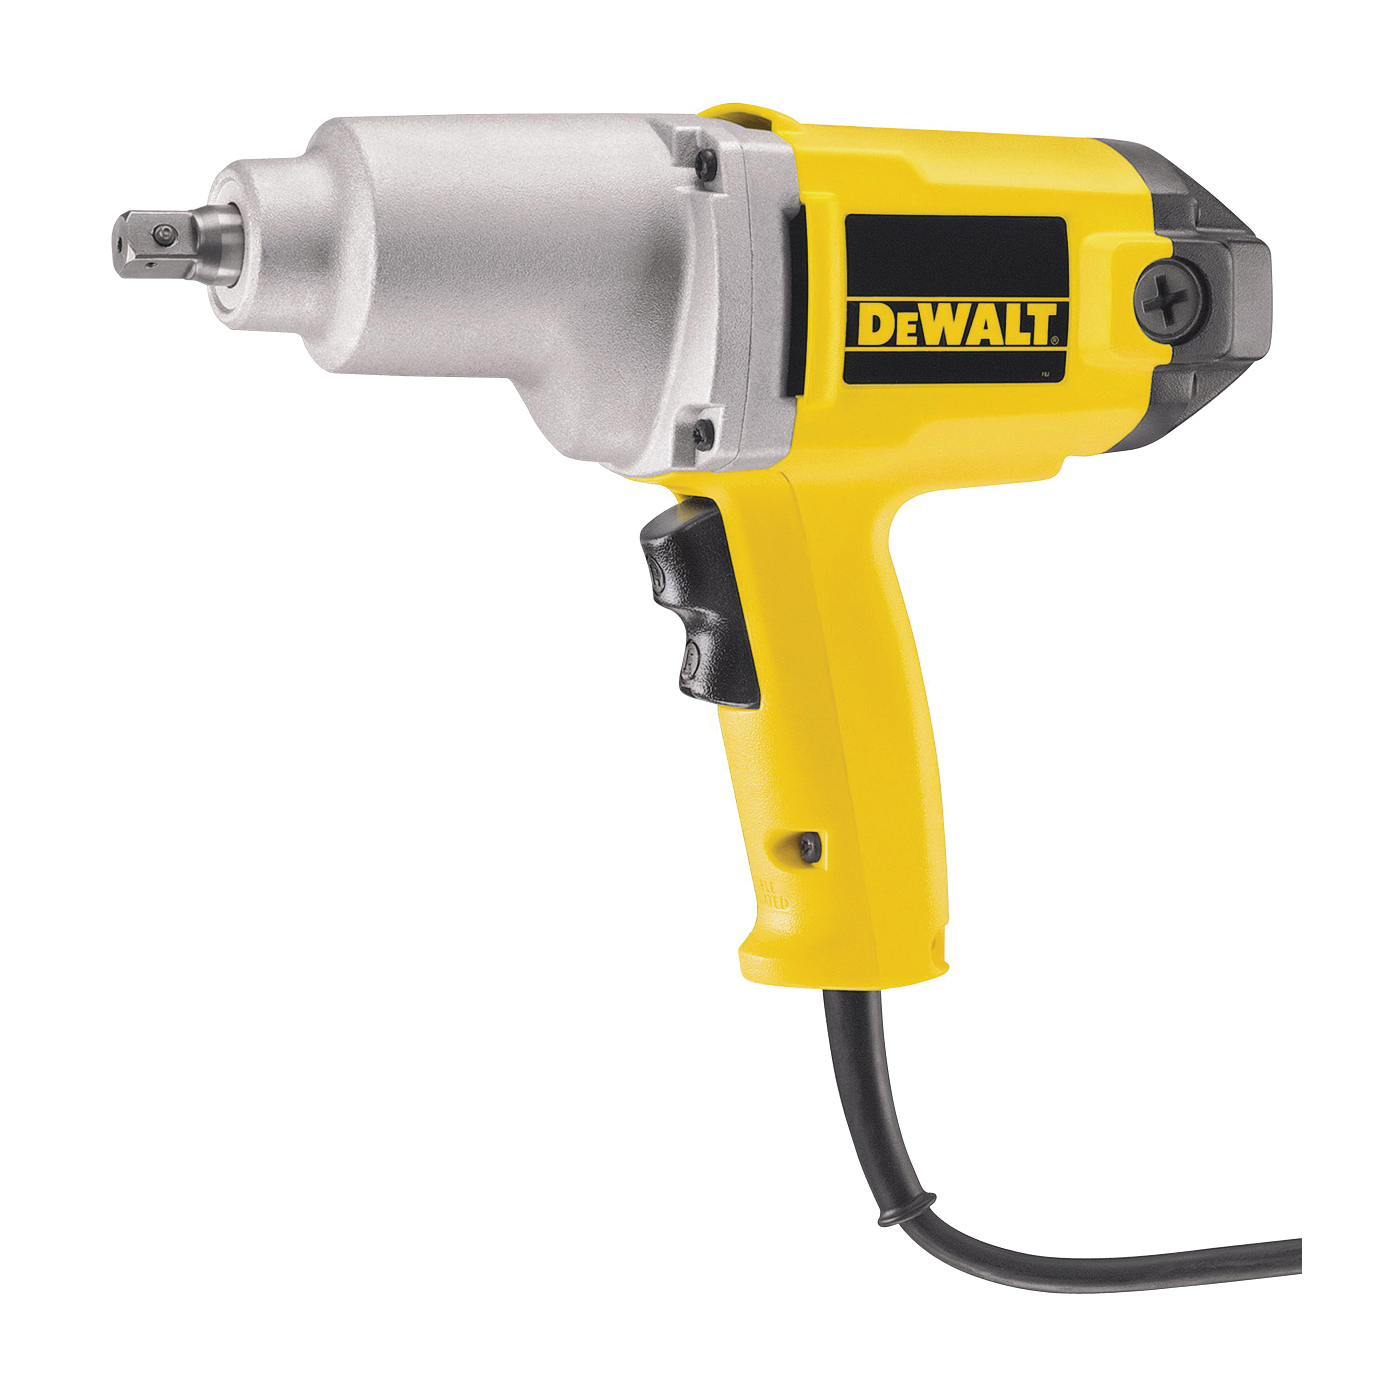 DW292 Impact Wrench with Detent Pin Anvil, 7.5 A, 1/2 in Drive, Square Drive, 2700 ipm, 2100 rpm Speed